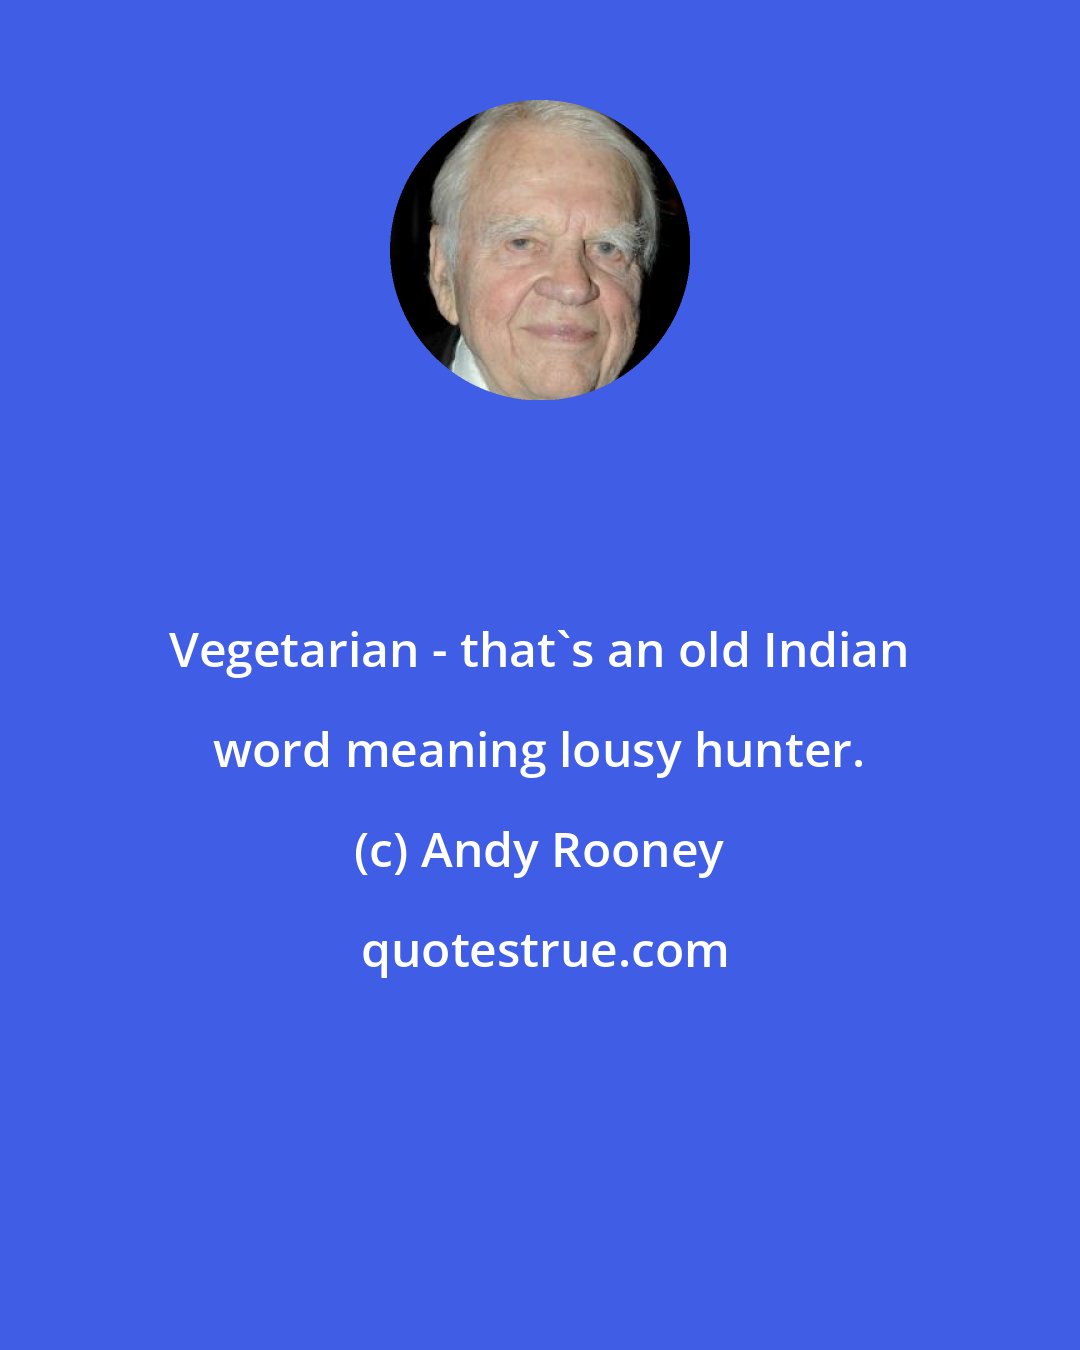 Andy Rooney: Vegetarian - that's an old Indian word meaning lousy hunter.